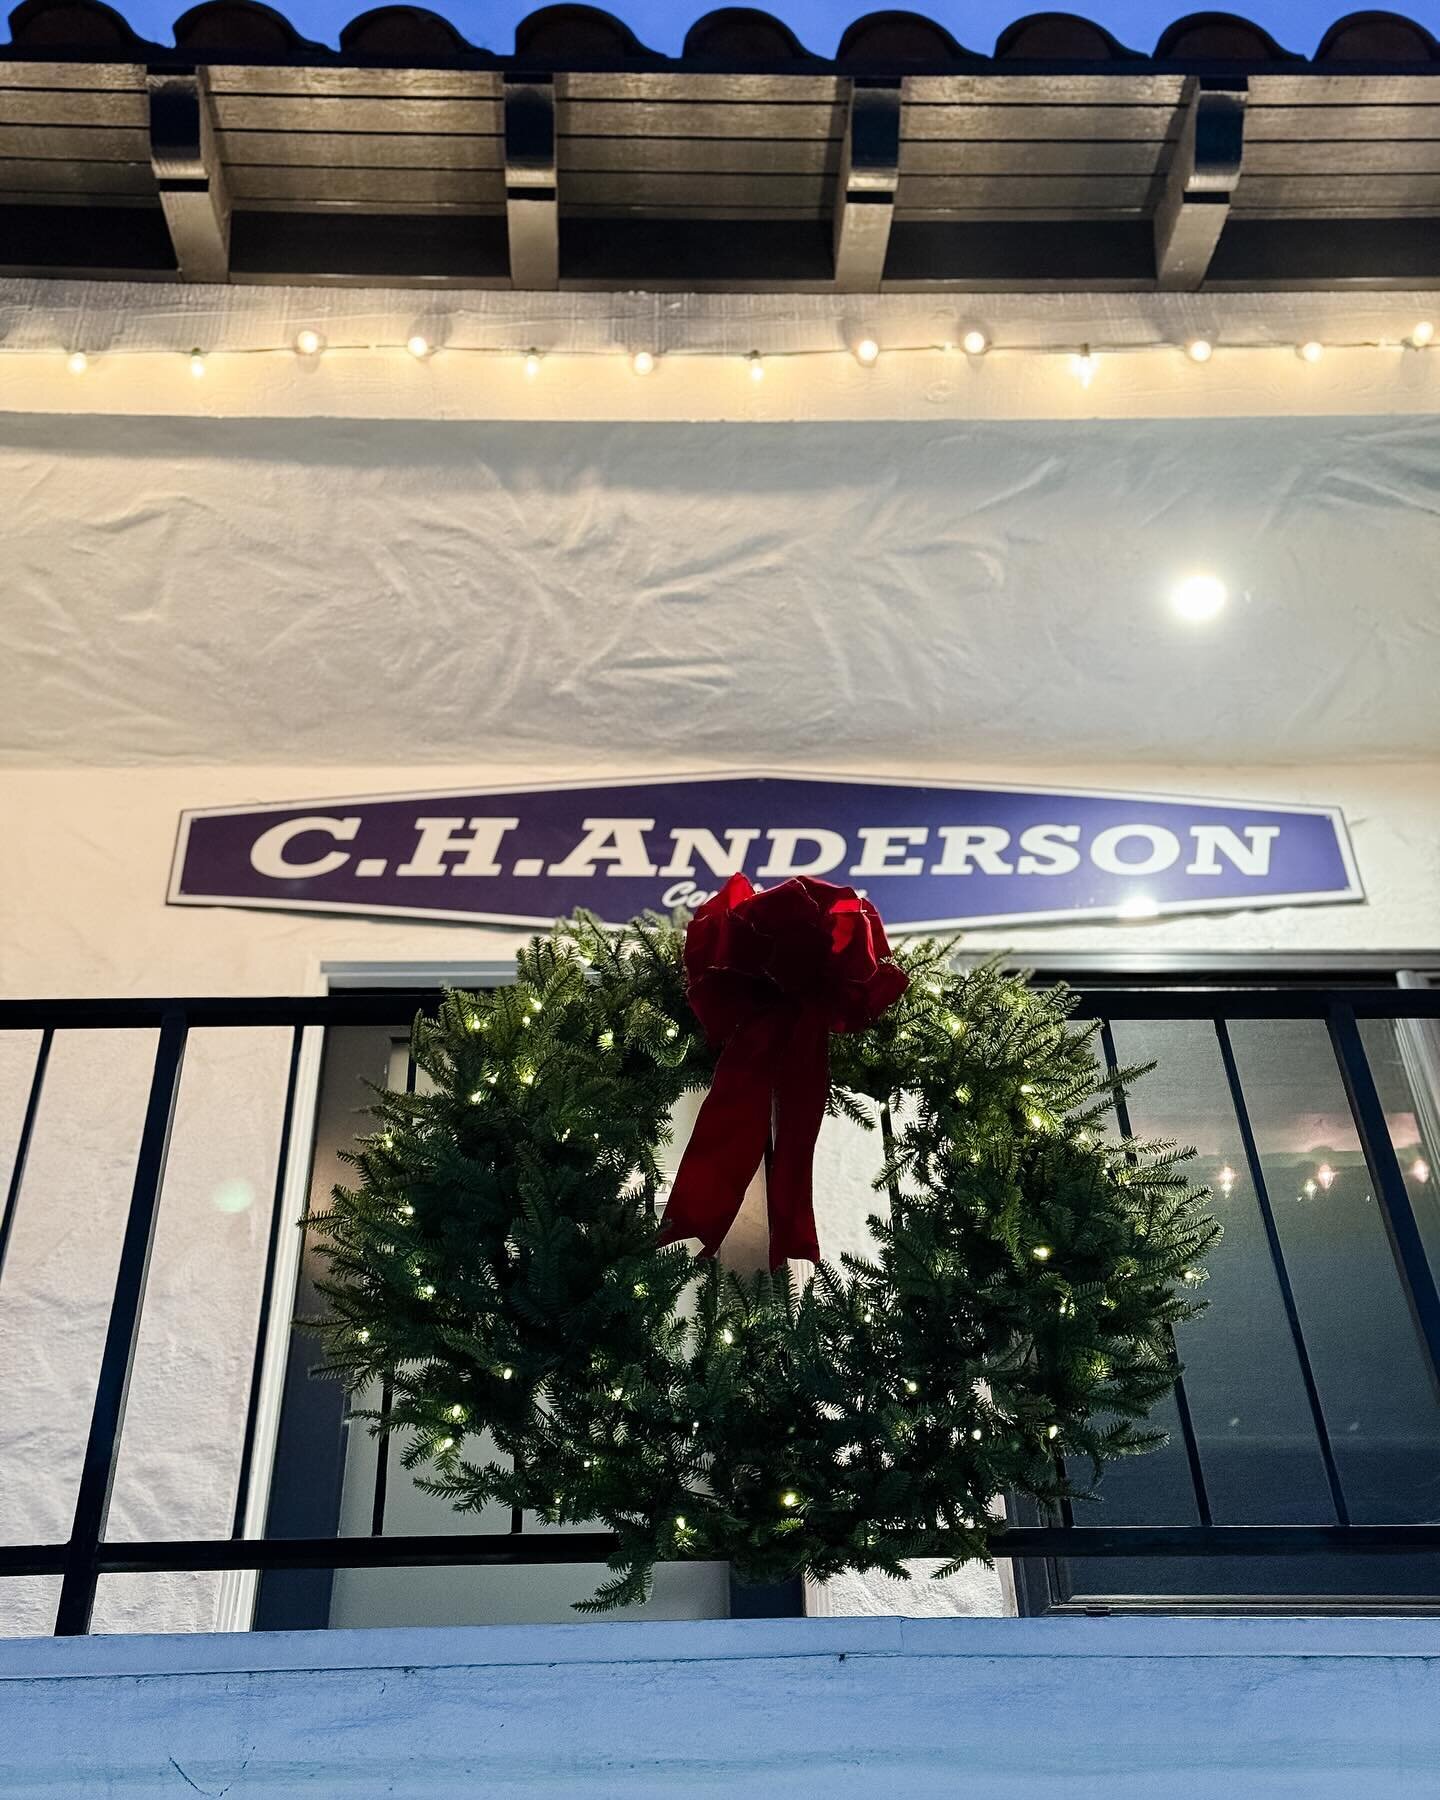 Merry Christmas from the CH Anderson team! We hope you had a wonderful Holiday season!